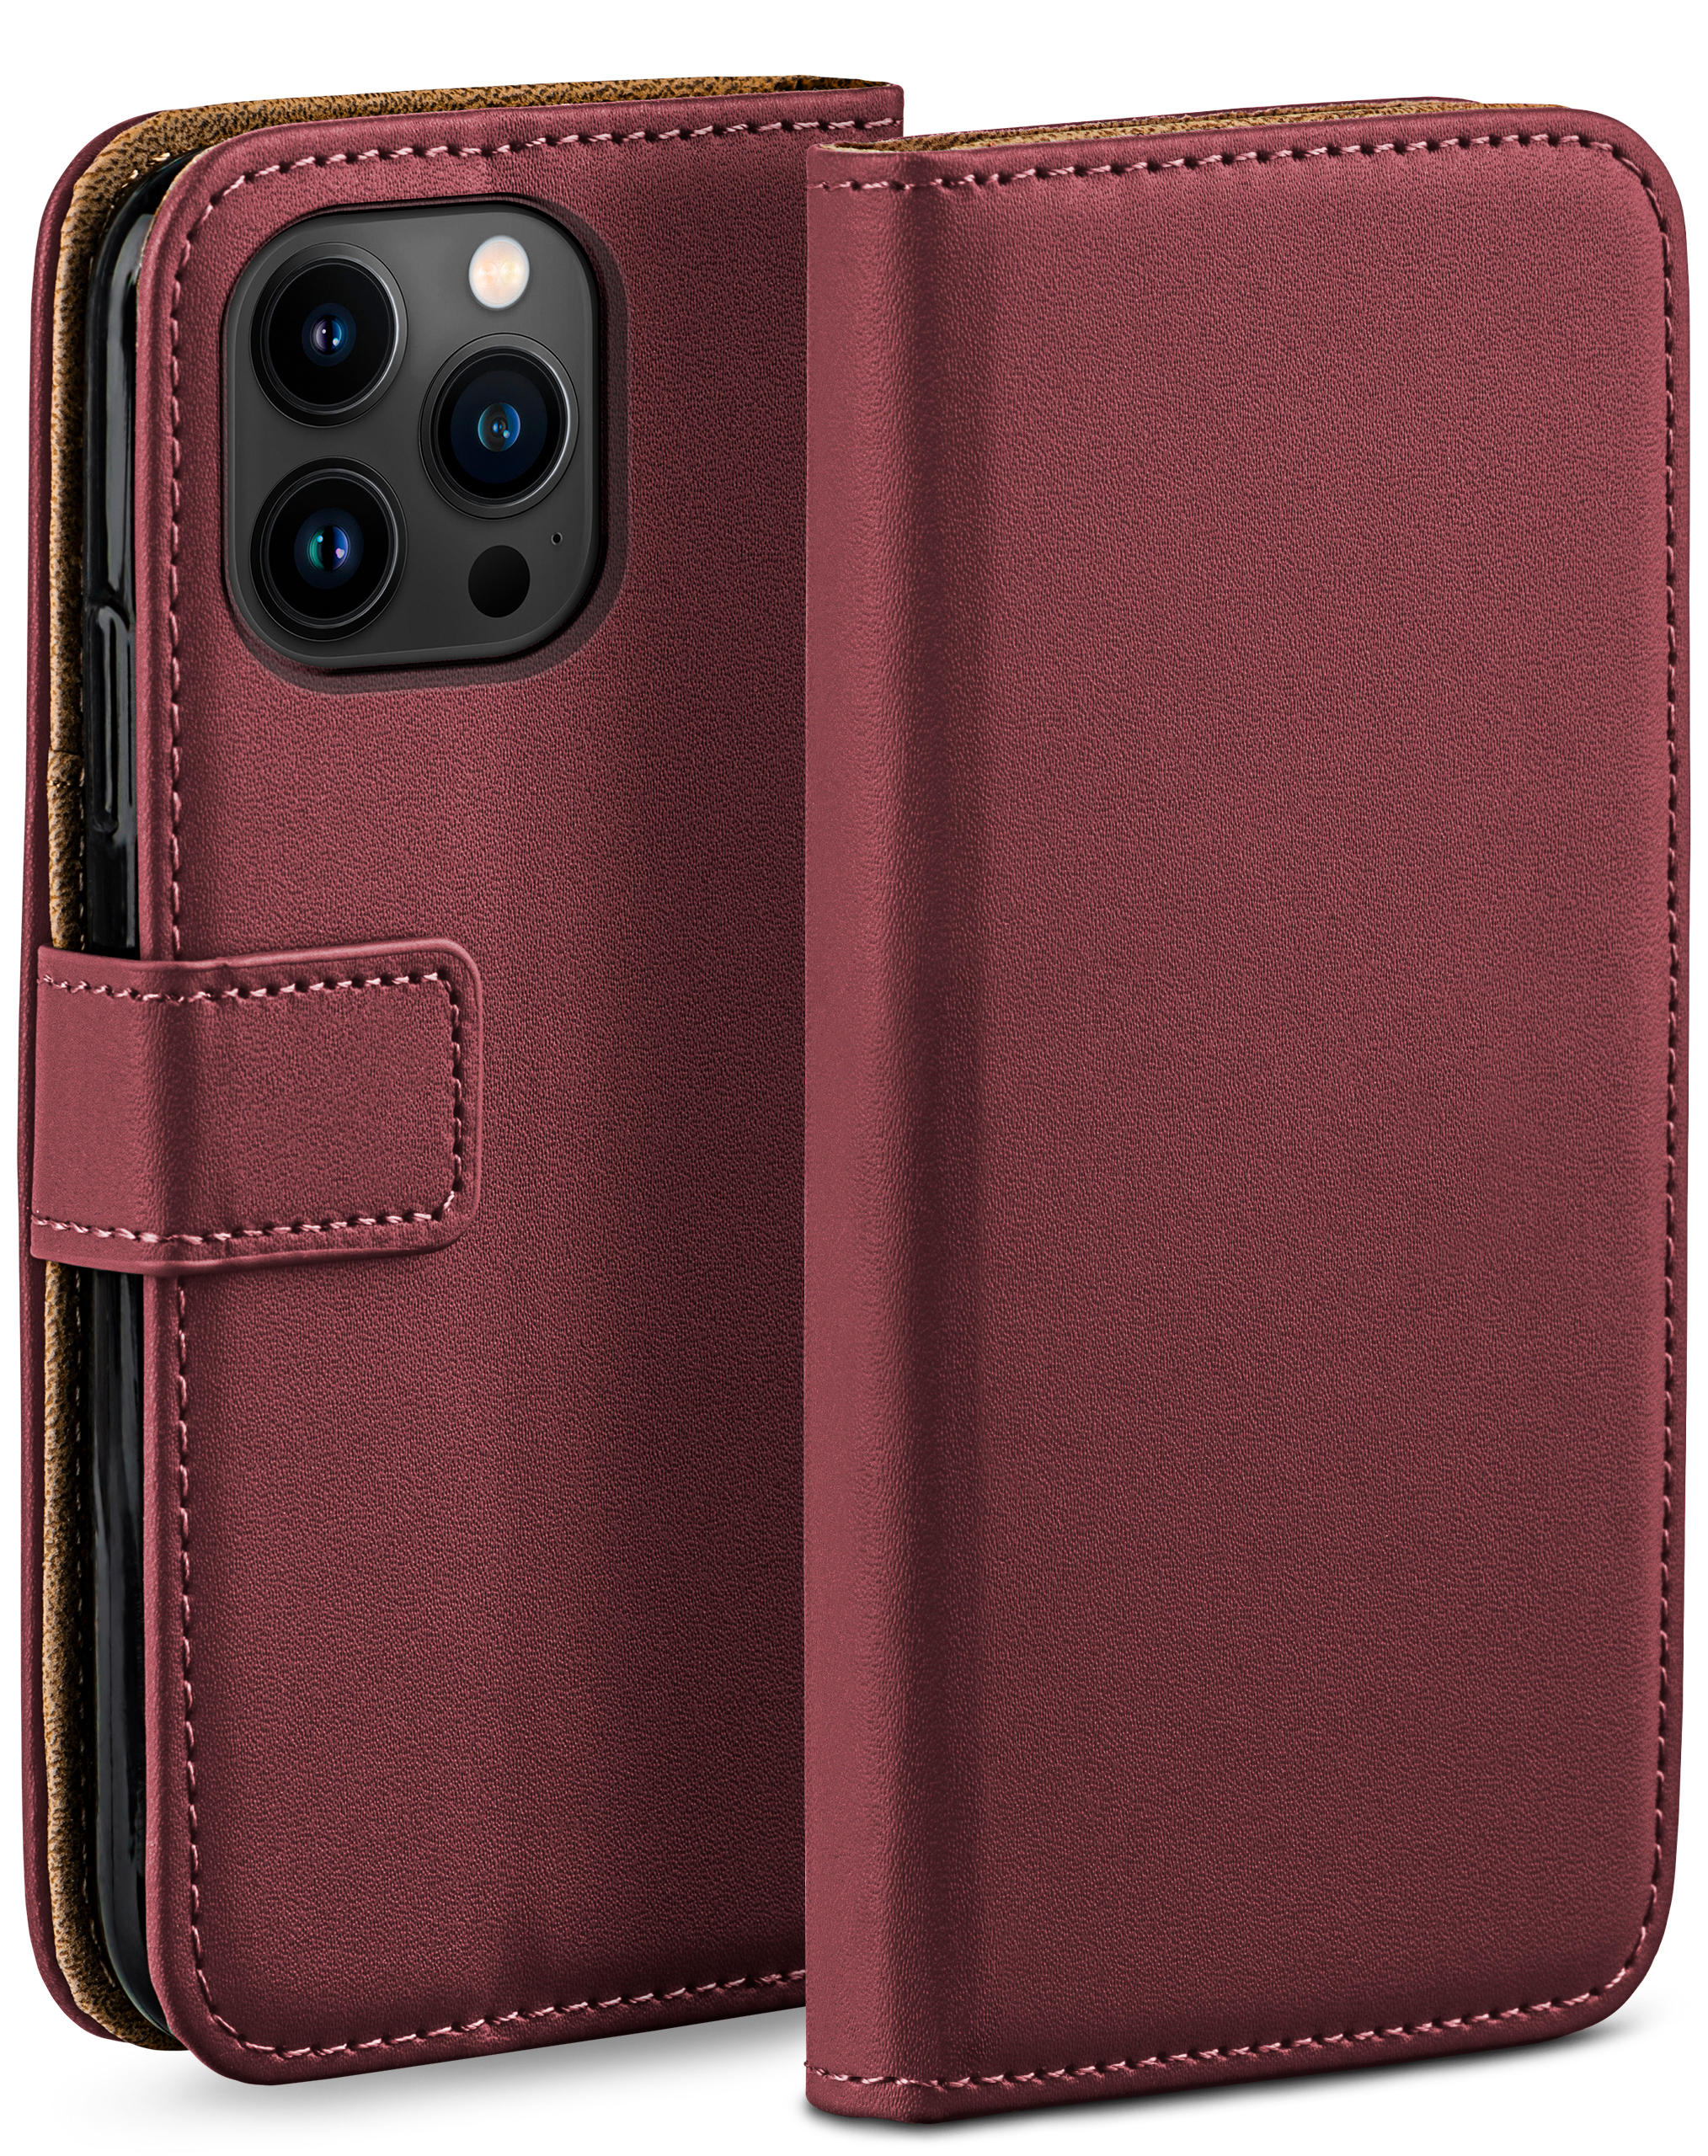 Bookcover, iPhone Pro 14 Apple, Maroon-Red Max, MOEX Book Case,